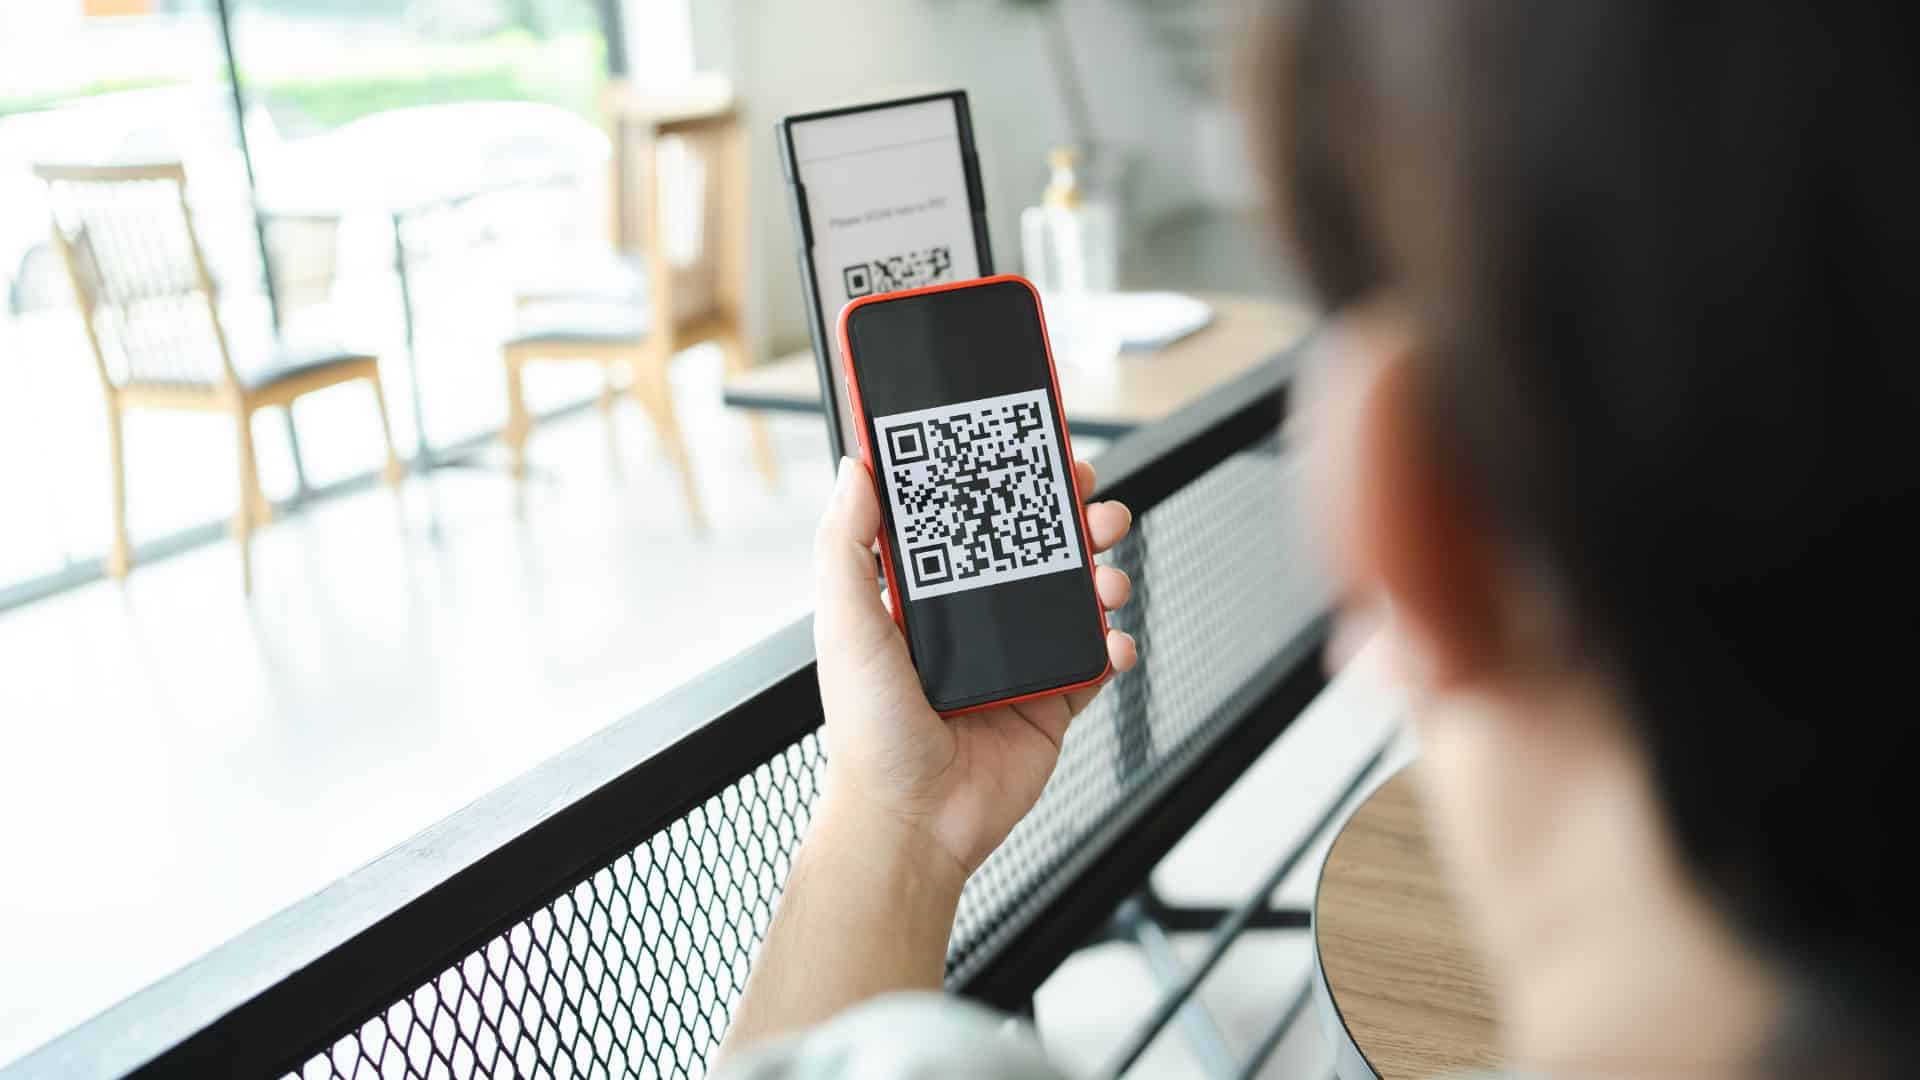 PAY BY QR CODE